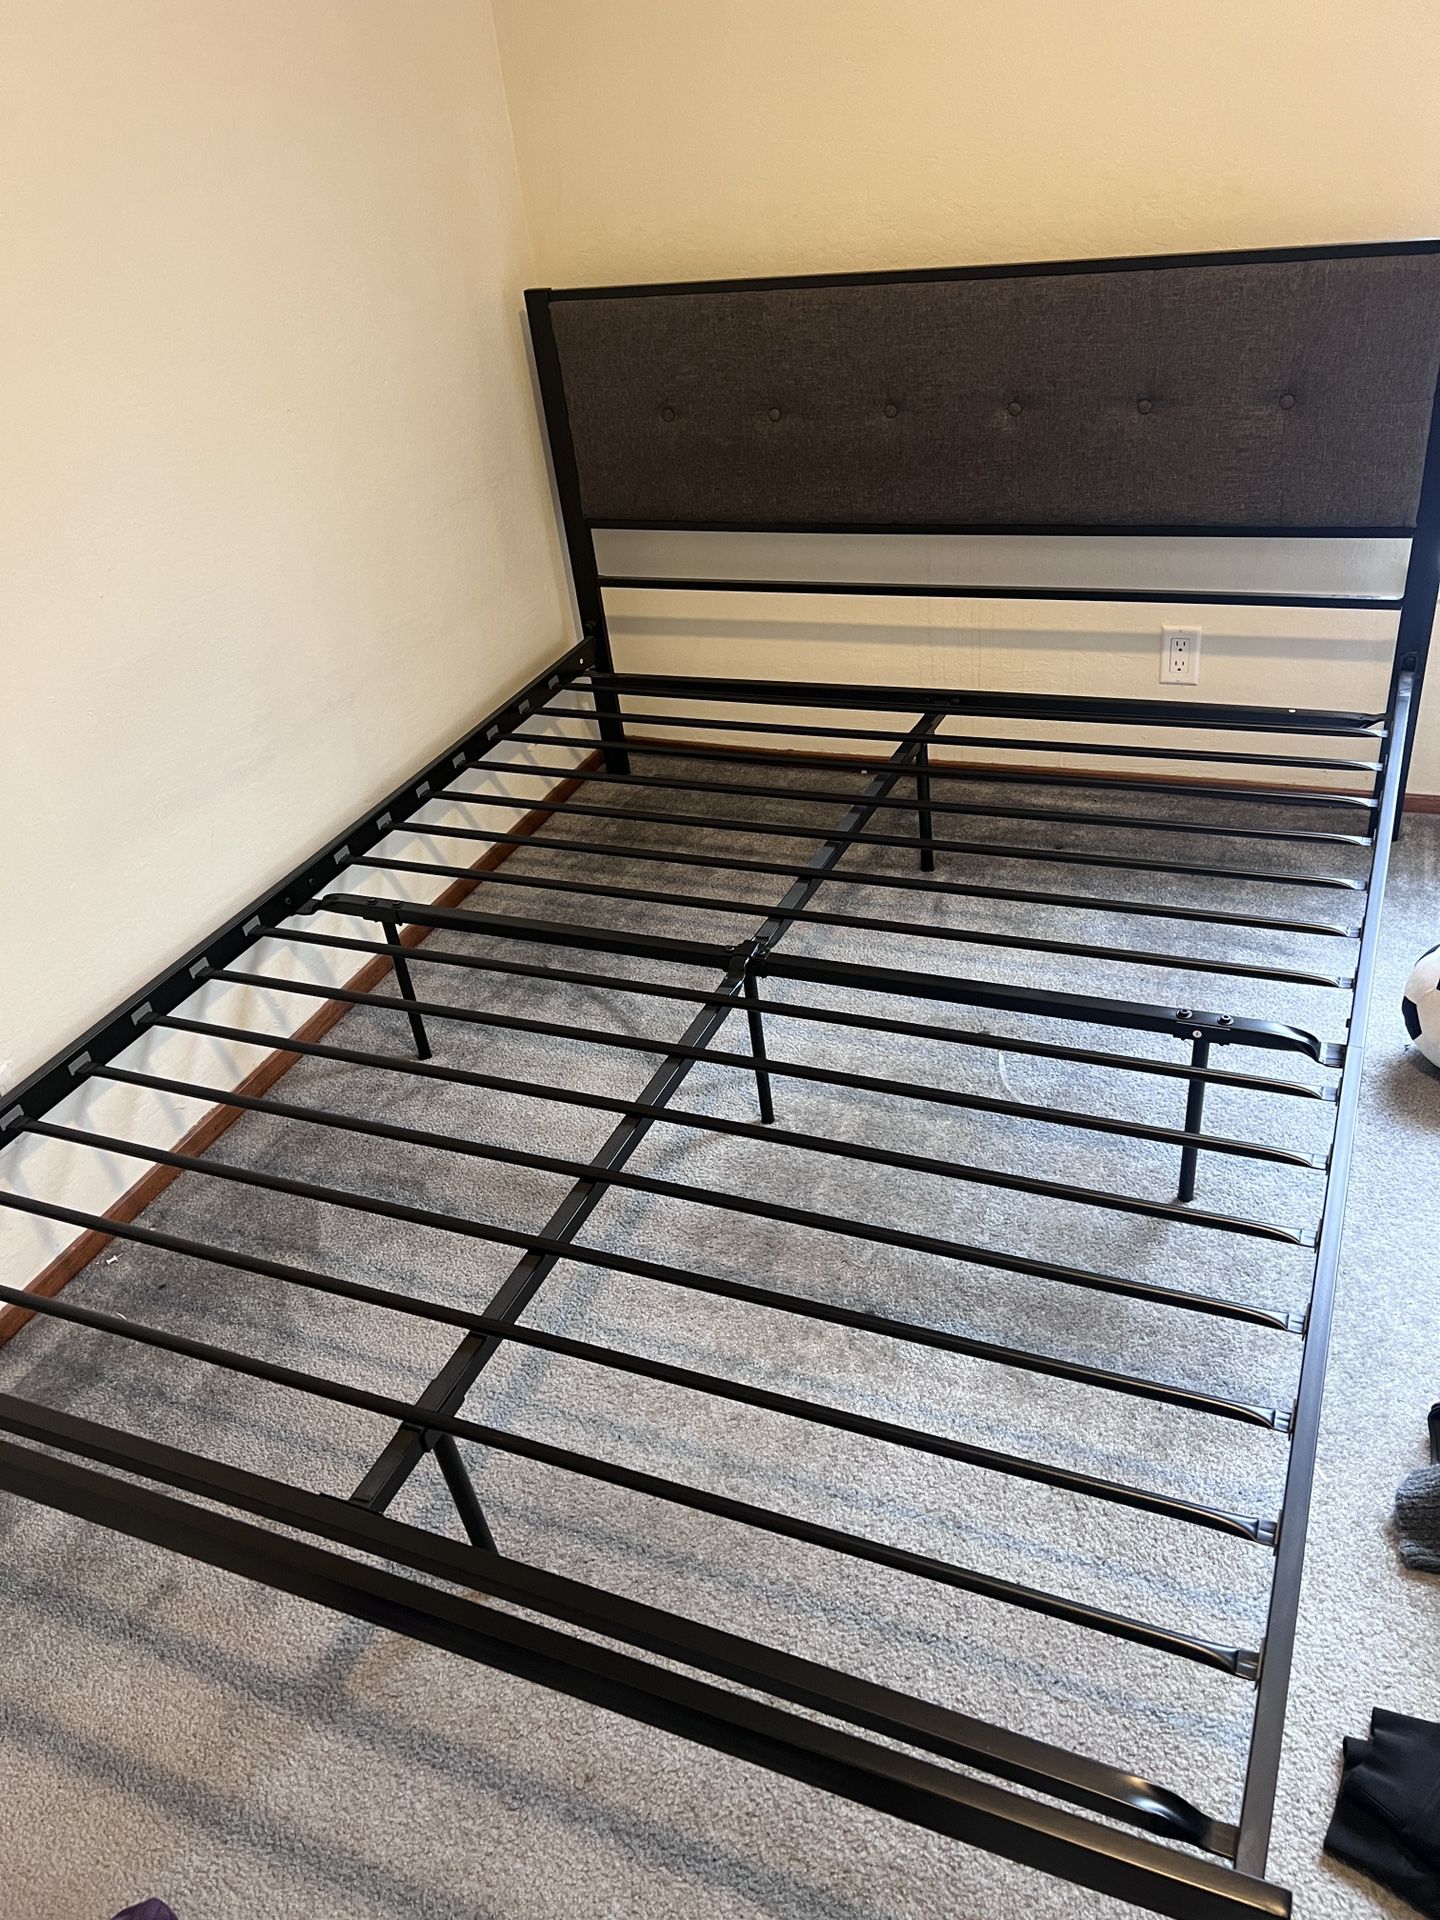 Queen Size Bed Frame 